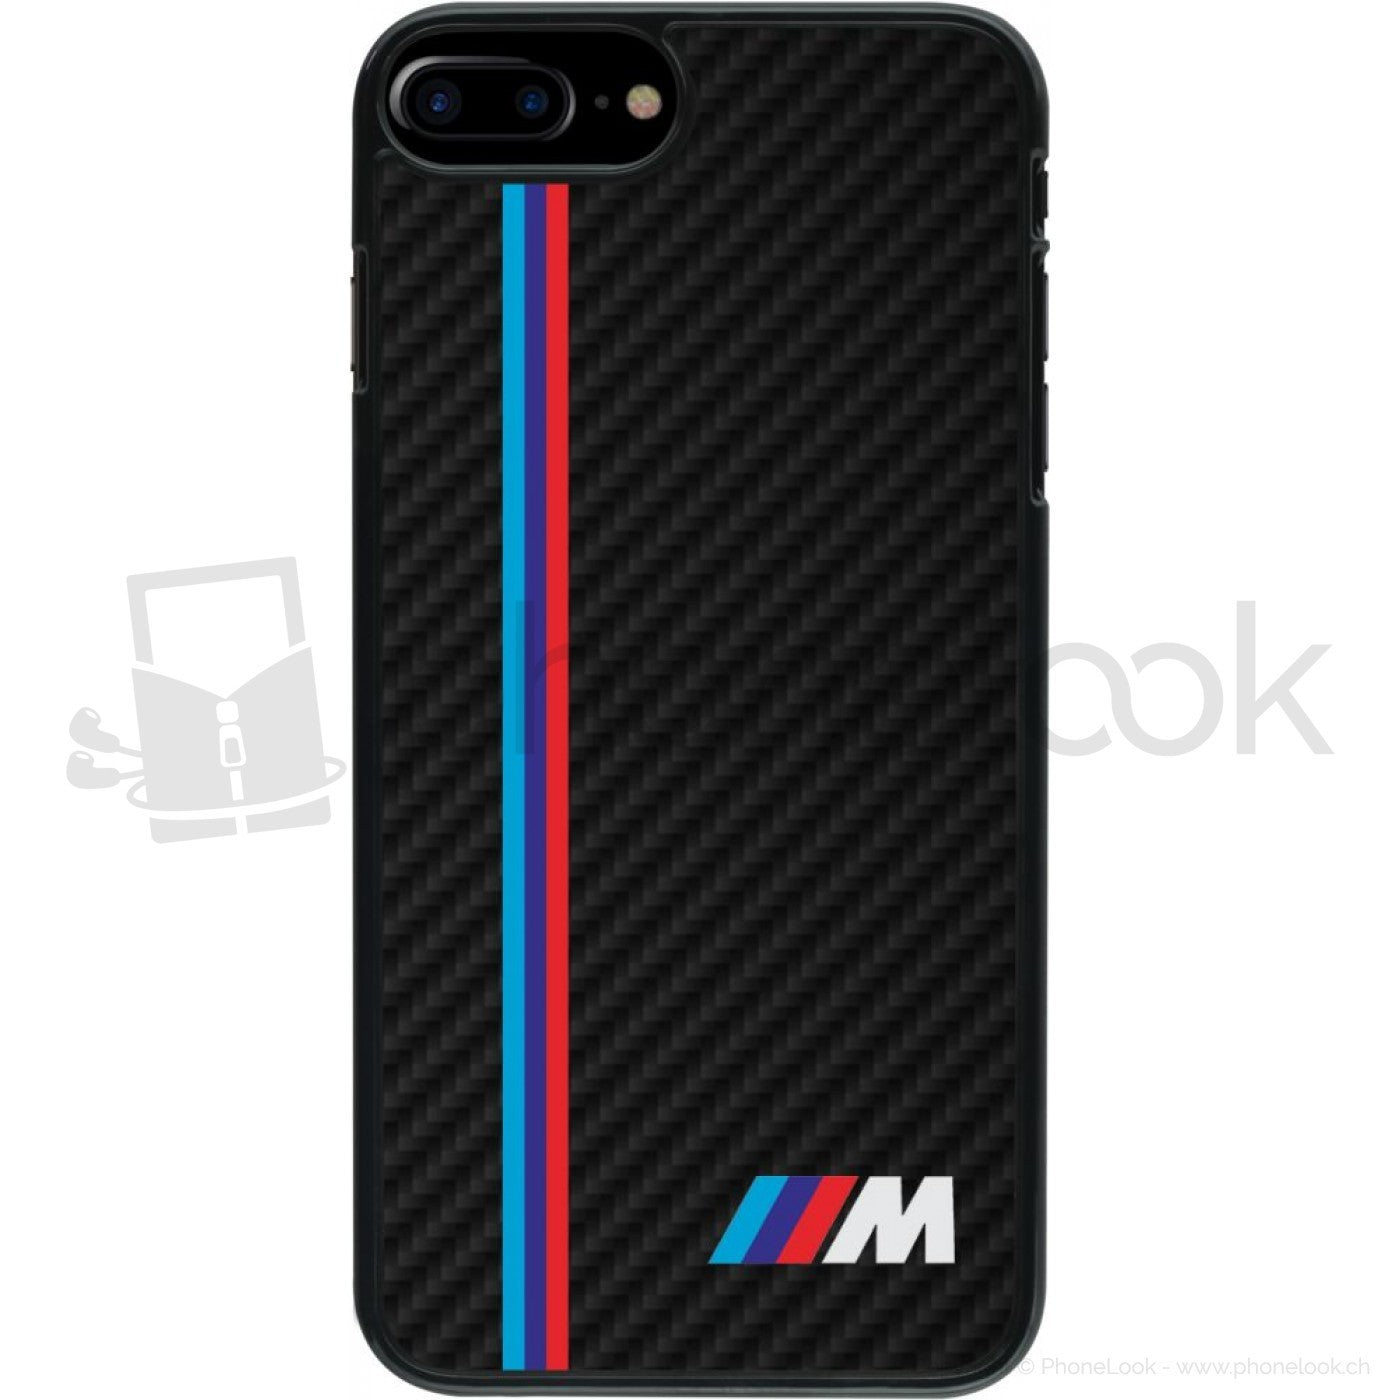 https://cdn.shopify.com/s/files/1/0222/9148/0672/products/iphone_208_20coque_20bmw-224dgd.jpg?v=1571182490